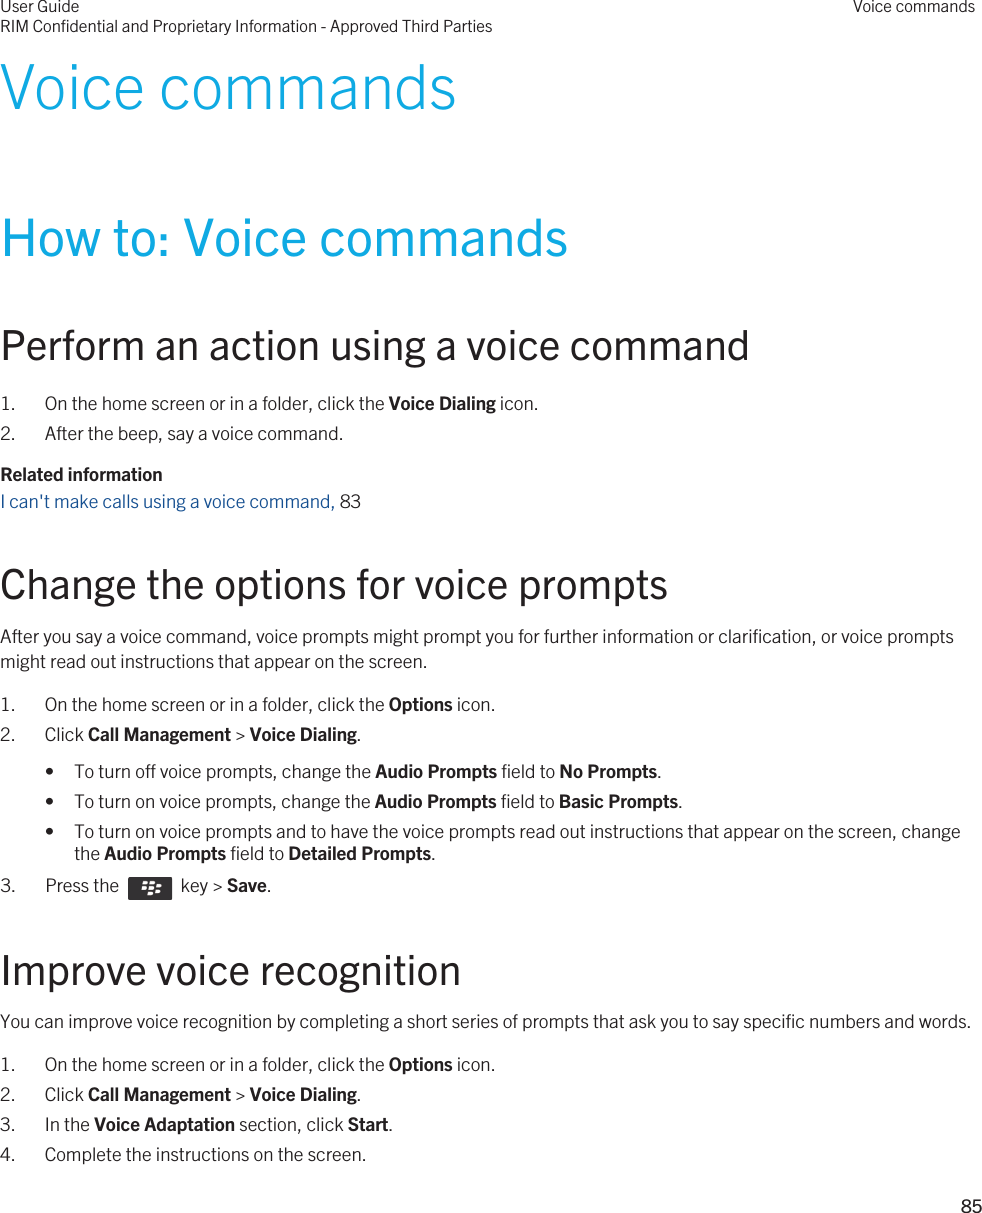 Voice commandsHow to: Voice commandsPerform an action using a voice command1. On the home screen or in a folder, click the Voice Dialing icon.2. After the beep, say a voice command.Related informationI can&apos;t make calls using a voice command, 83 Change the options for voice promptsAfter you say a voice command, voice prompts might prompt you for further information or clarification, or voice prompts might read out instructions that appear on the screen.1. On the home screen or in a folder, click the Options icon.2. Click Call Management &gt; Voice Dialing.• To turn off voice prompts, change the Audio Prompts field to No Prompts.• To turn on voice prompts, change the Audio Prompts field to Basic Prompts.• To turn on voice prompts and to have the voice prompts read out instructions that appear on the screen, change the Audio Prompts field to Detailed Prompts.3.  Press the    key &gt; Save. Improve voice recognitionYou can improve voice recognition by completing a short series of prompts that ask you to say specific numbers and words.1. On the home screen or in a folder, click the Options icon.2. Click Call Management &gt; Voice Dialing.3. In the Voice Adaptation section, click Start.4. Complete the instructions on the screen.User GuideRIM Confidential and Proprietary Information - Approved Third PartiesVoice commands85 